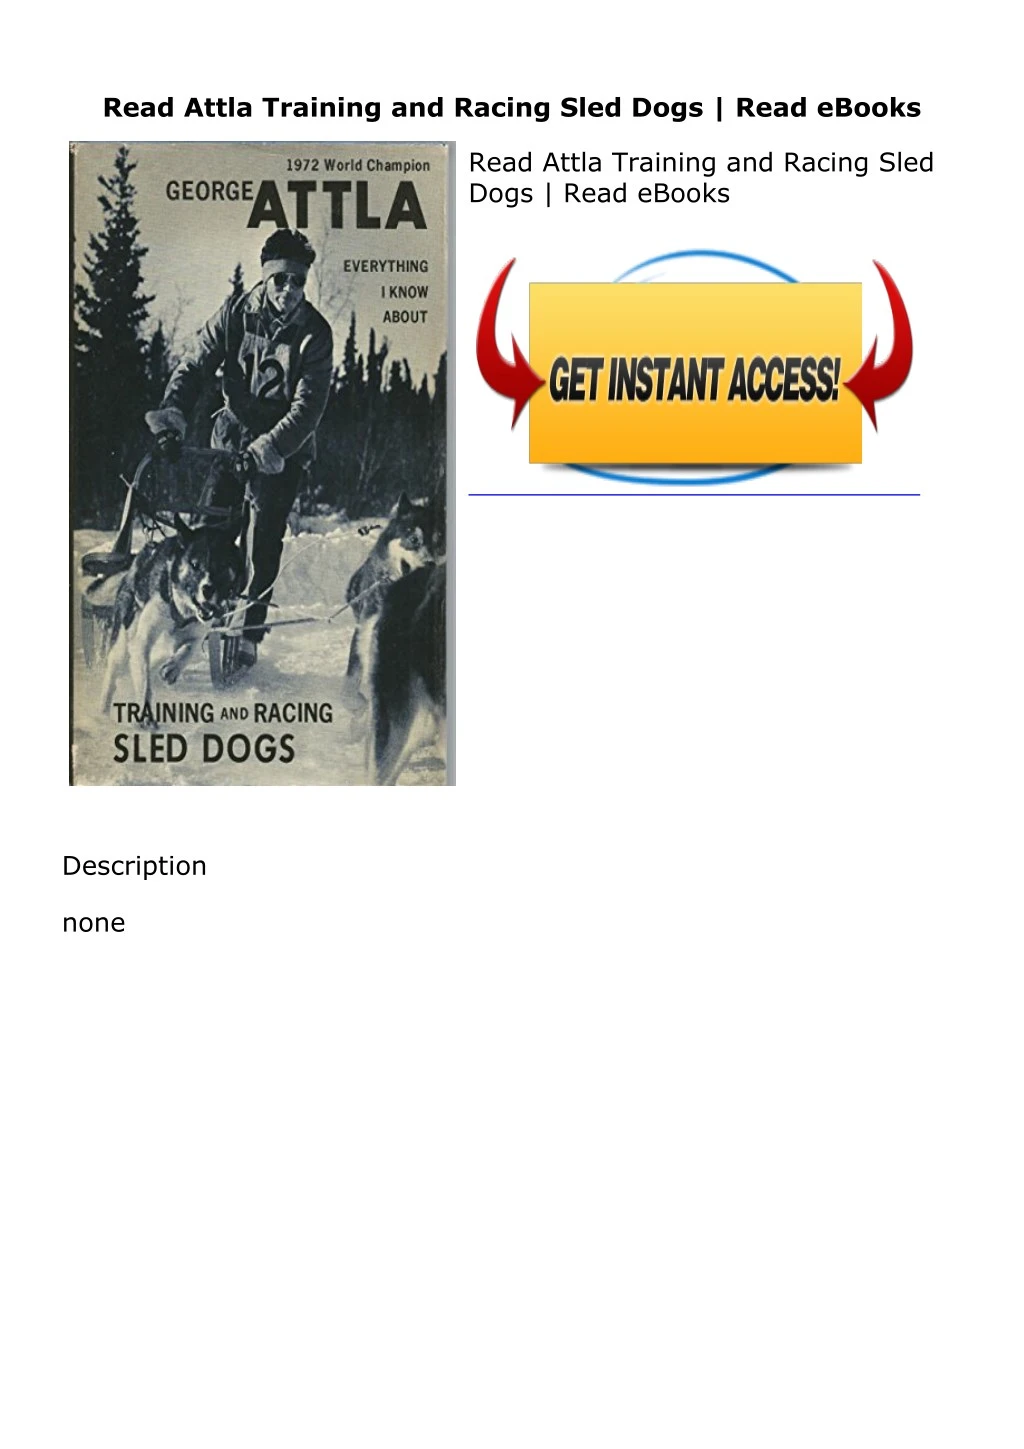 online pdf attla training and racing sled dogs